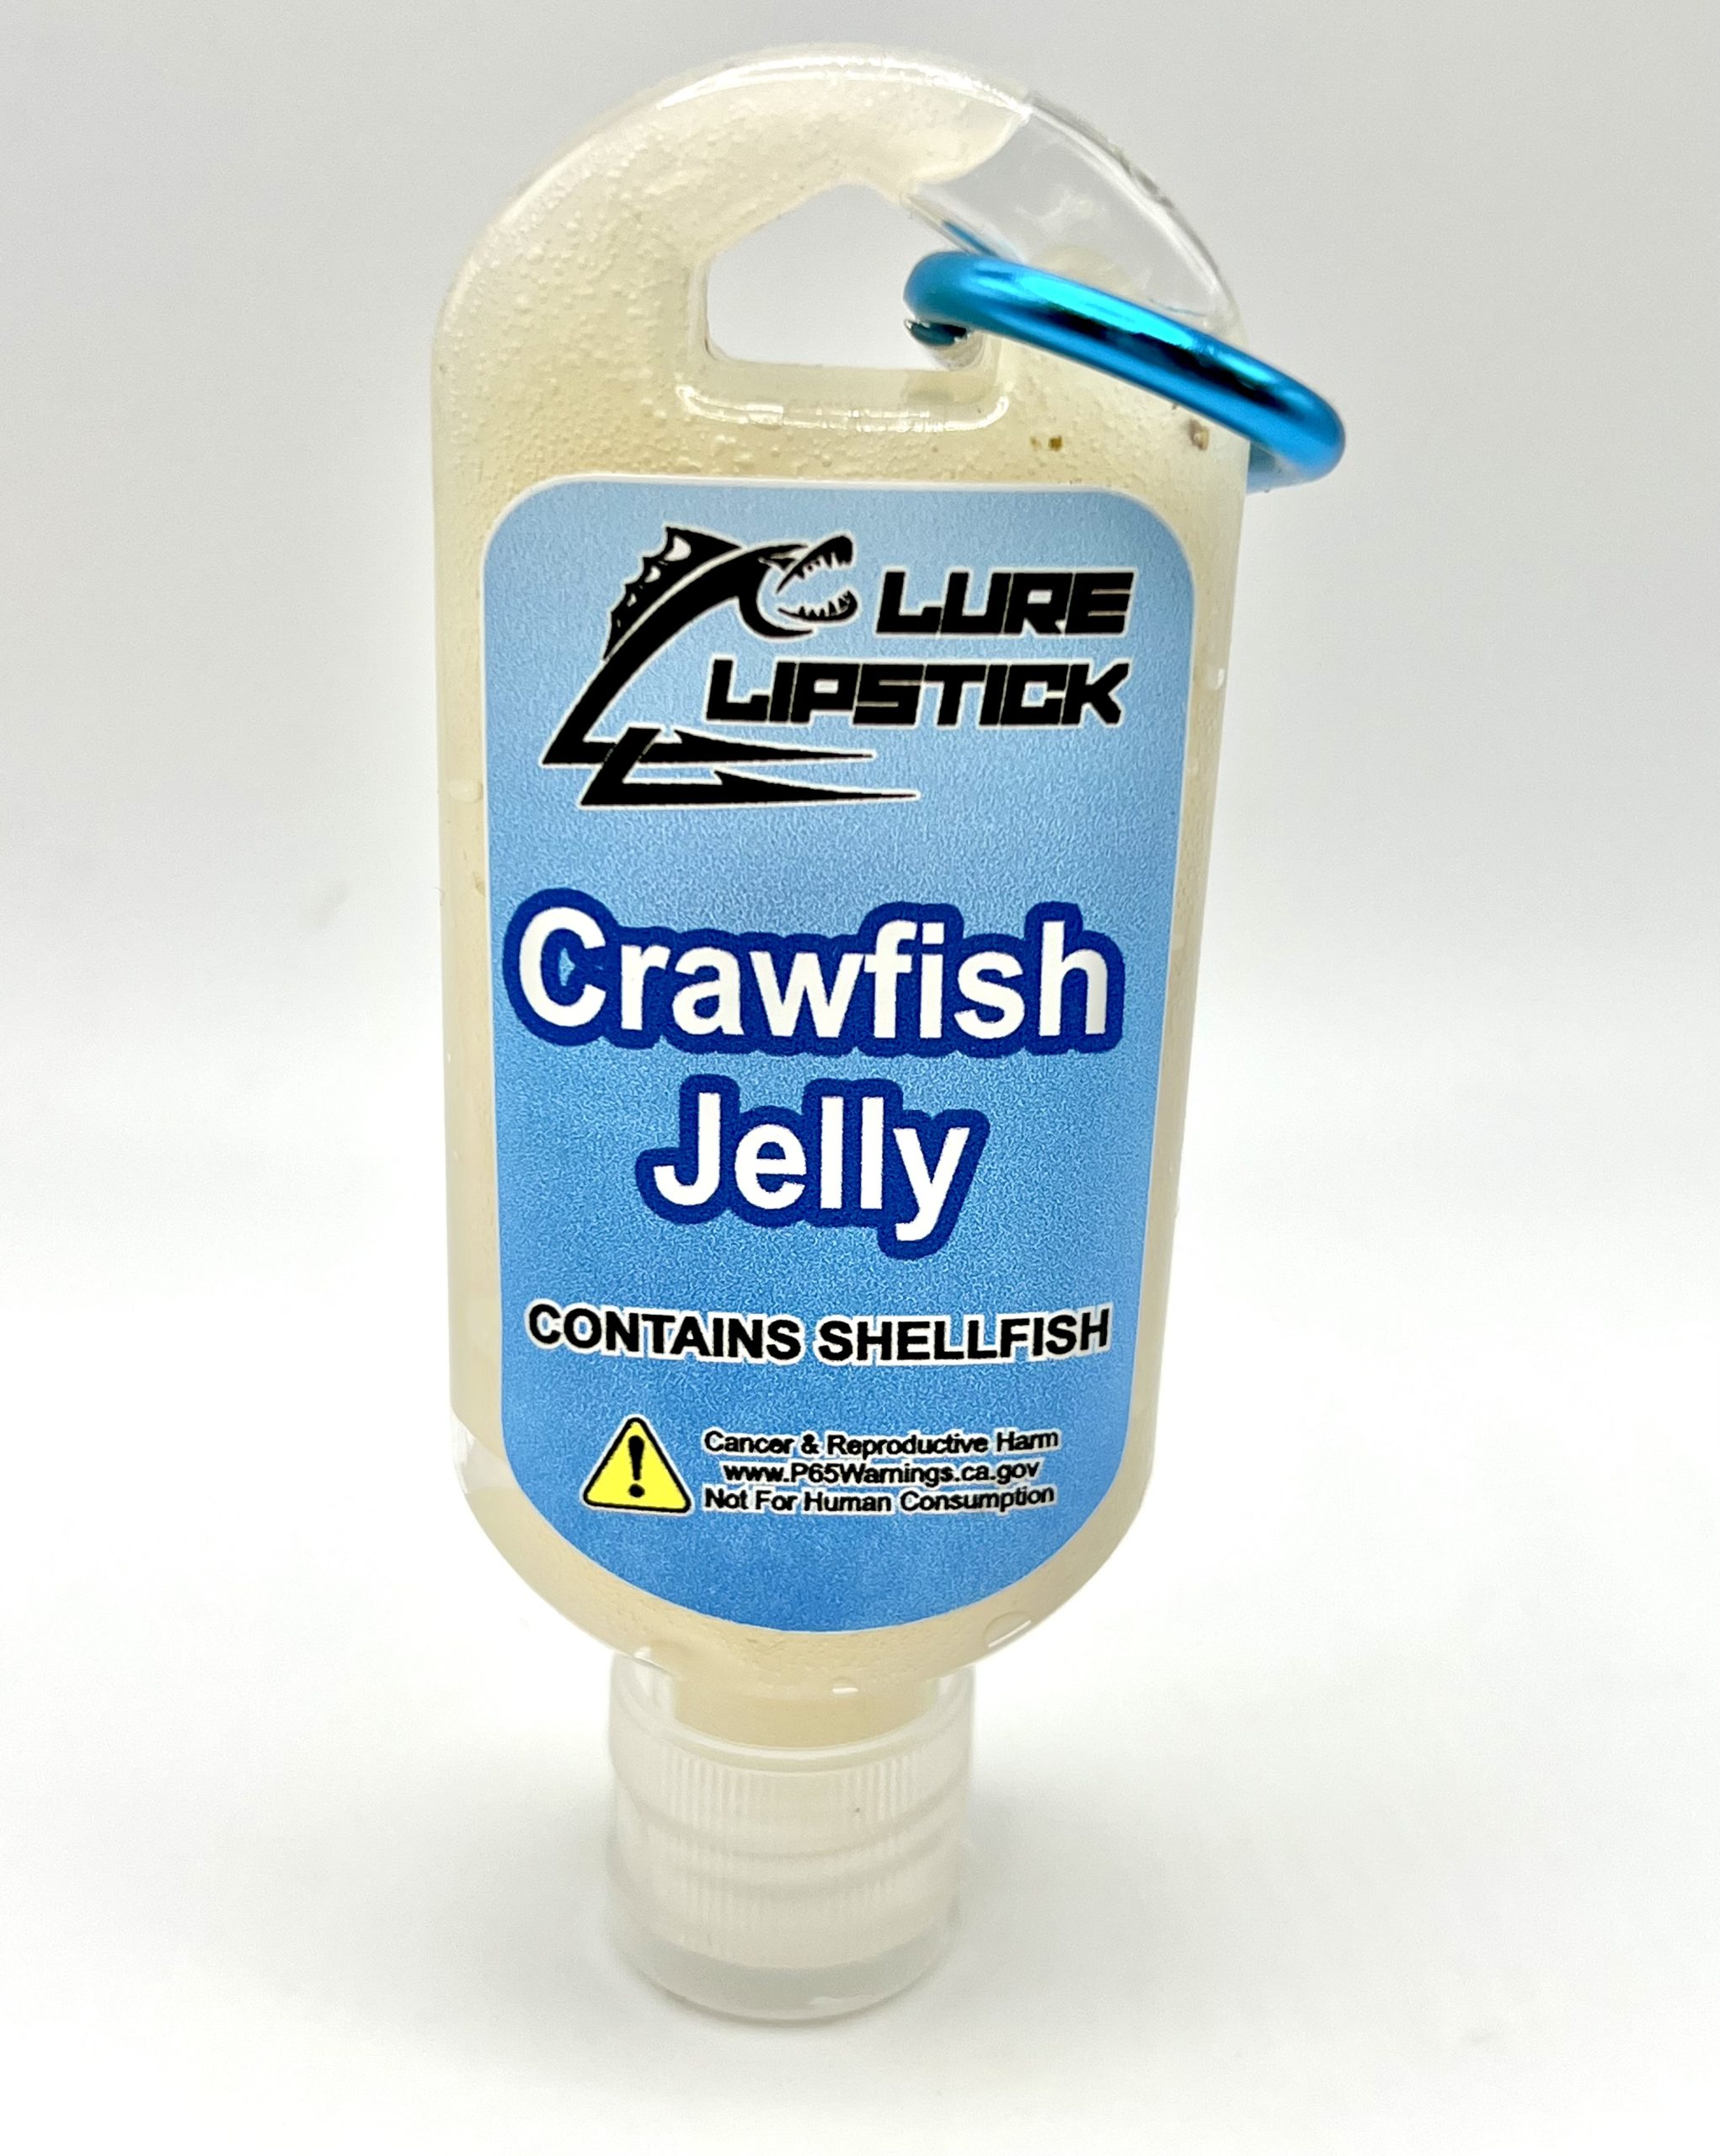 Lure Lipstick - Crawfish Jelly - 3oz Squirt Top Bottle